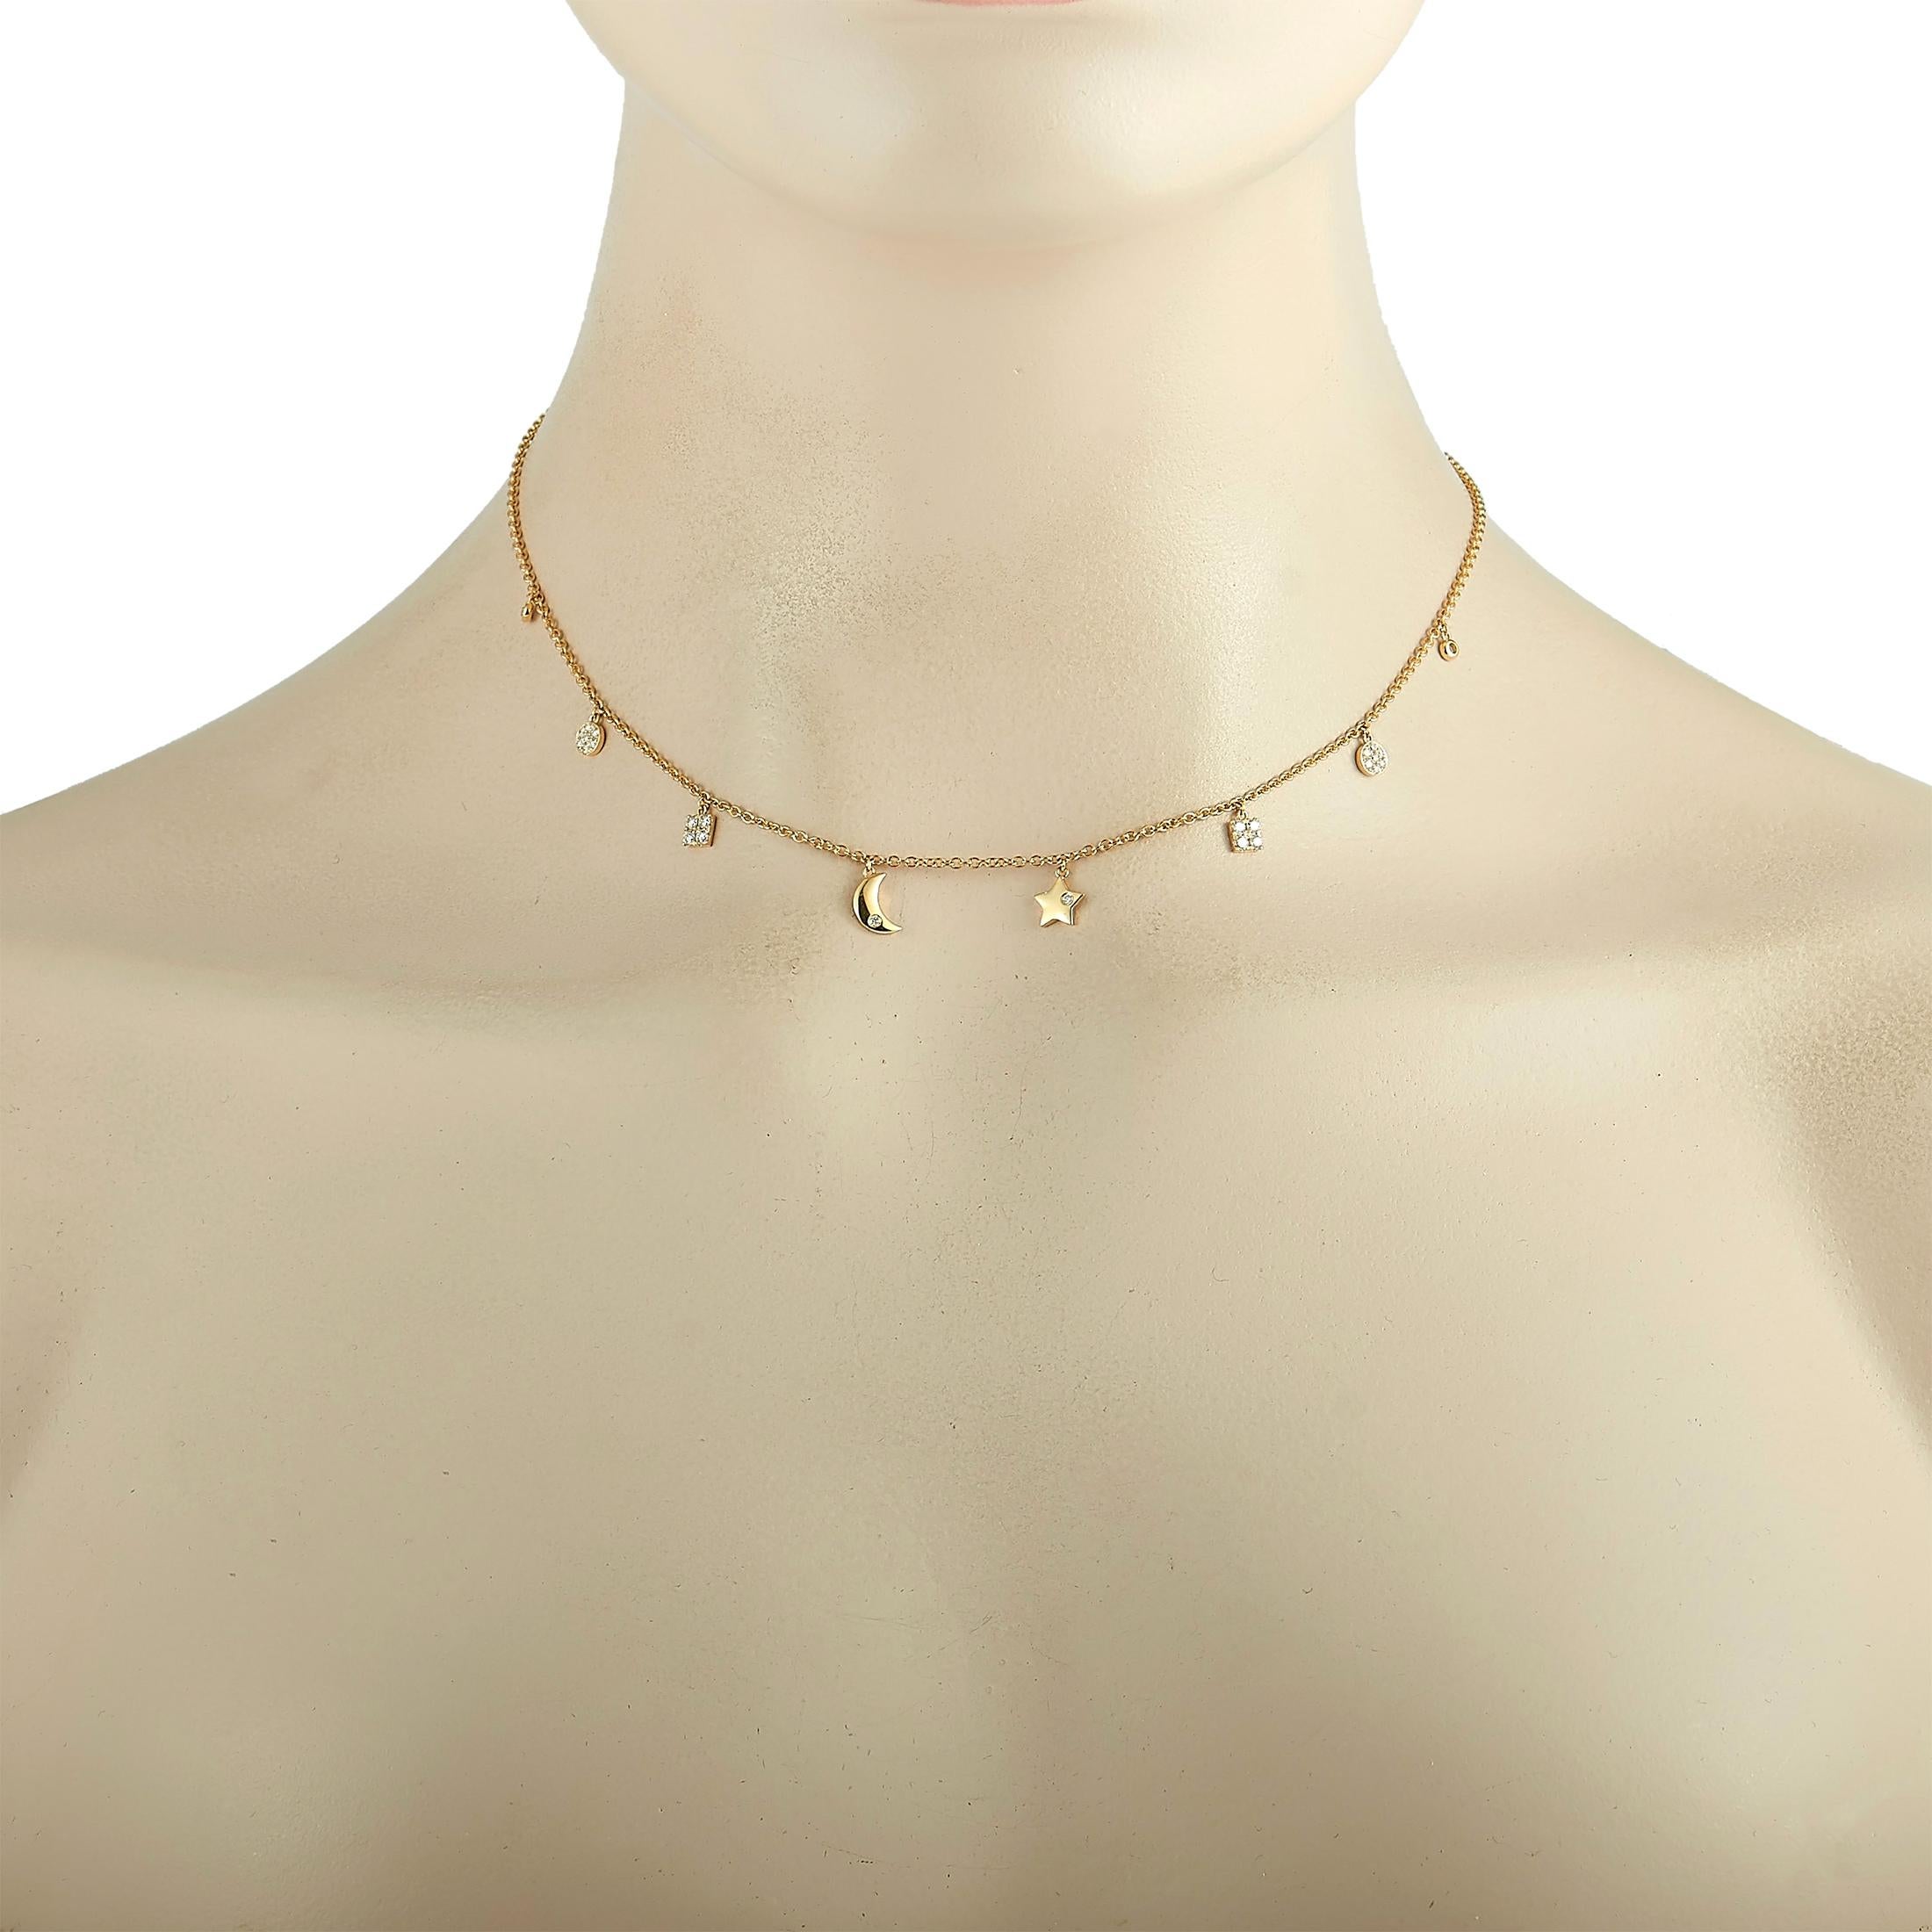 This LB Exclusive necklace is crafted from 18K yellow gold and weighs 4.4 grams, measuring 15” in length. The necklace is set with diamonds that total 0.50 carats.
 
 Offered in brand new condition, this jewelry piece includes a gift box.